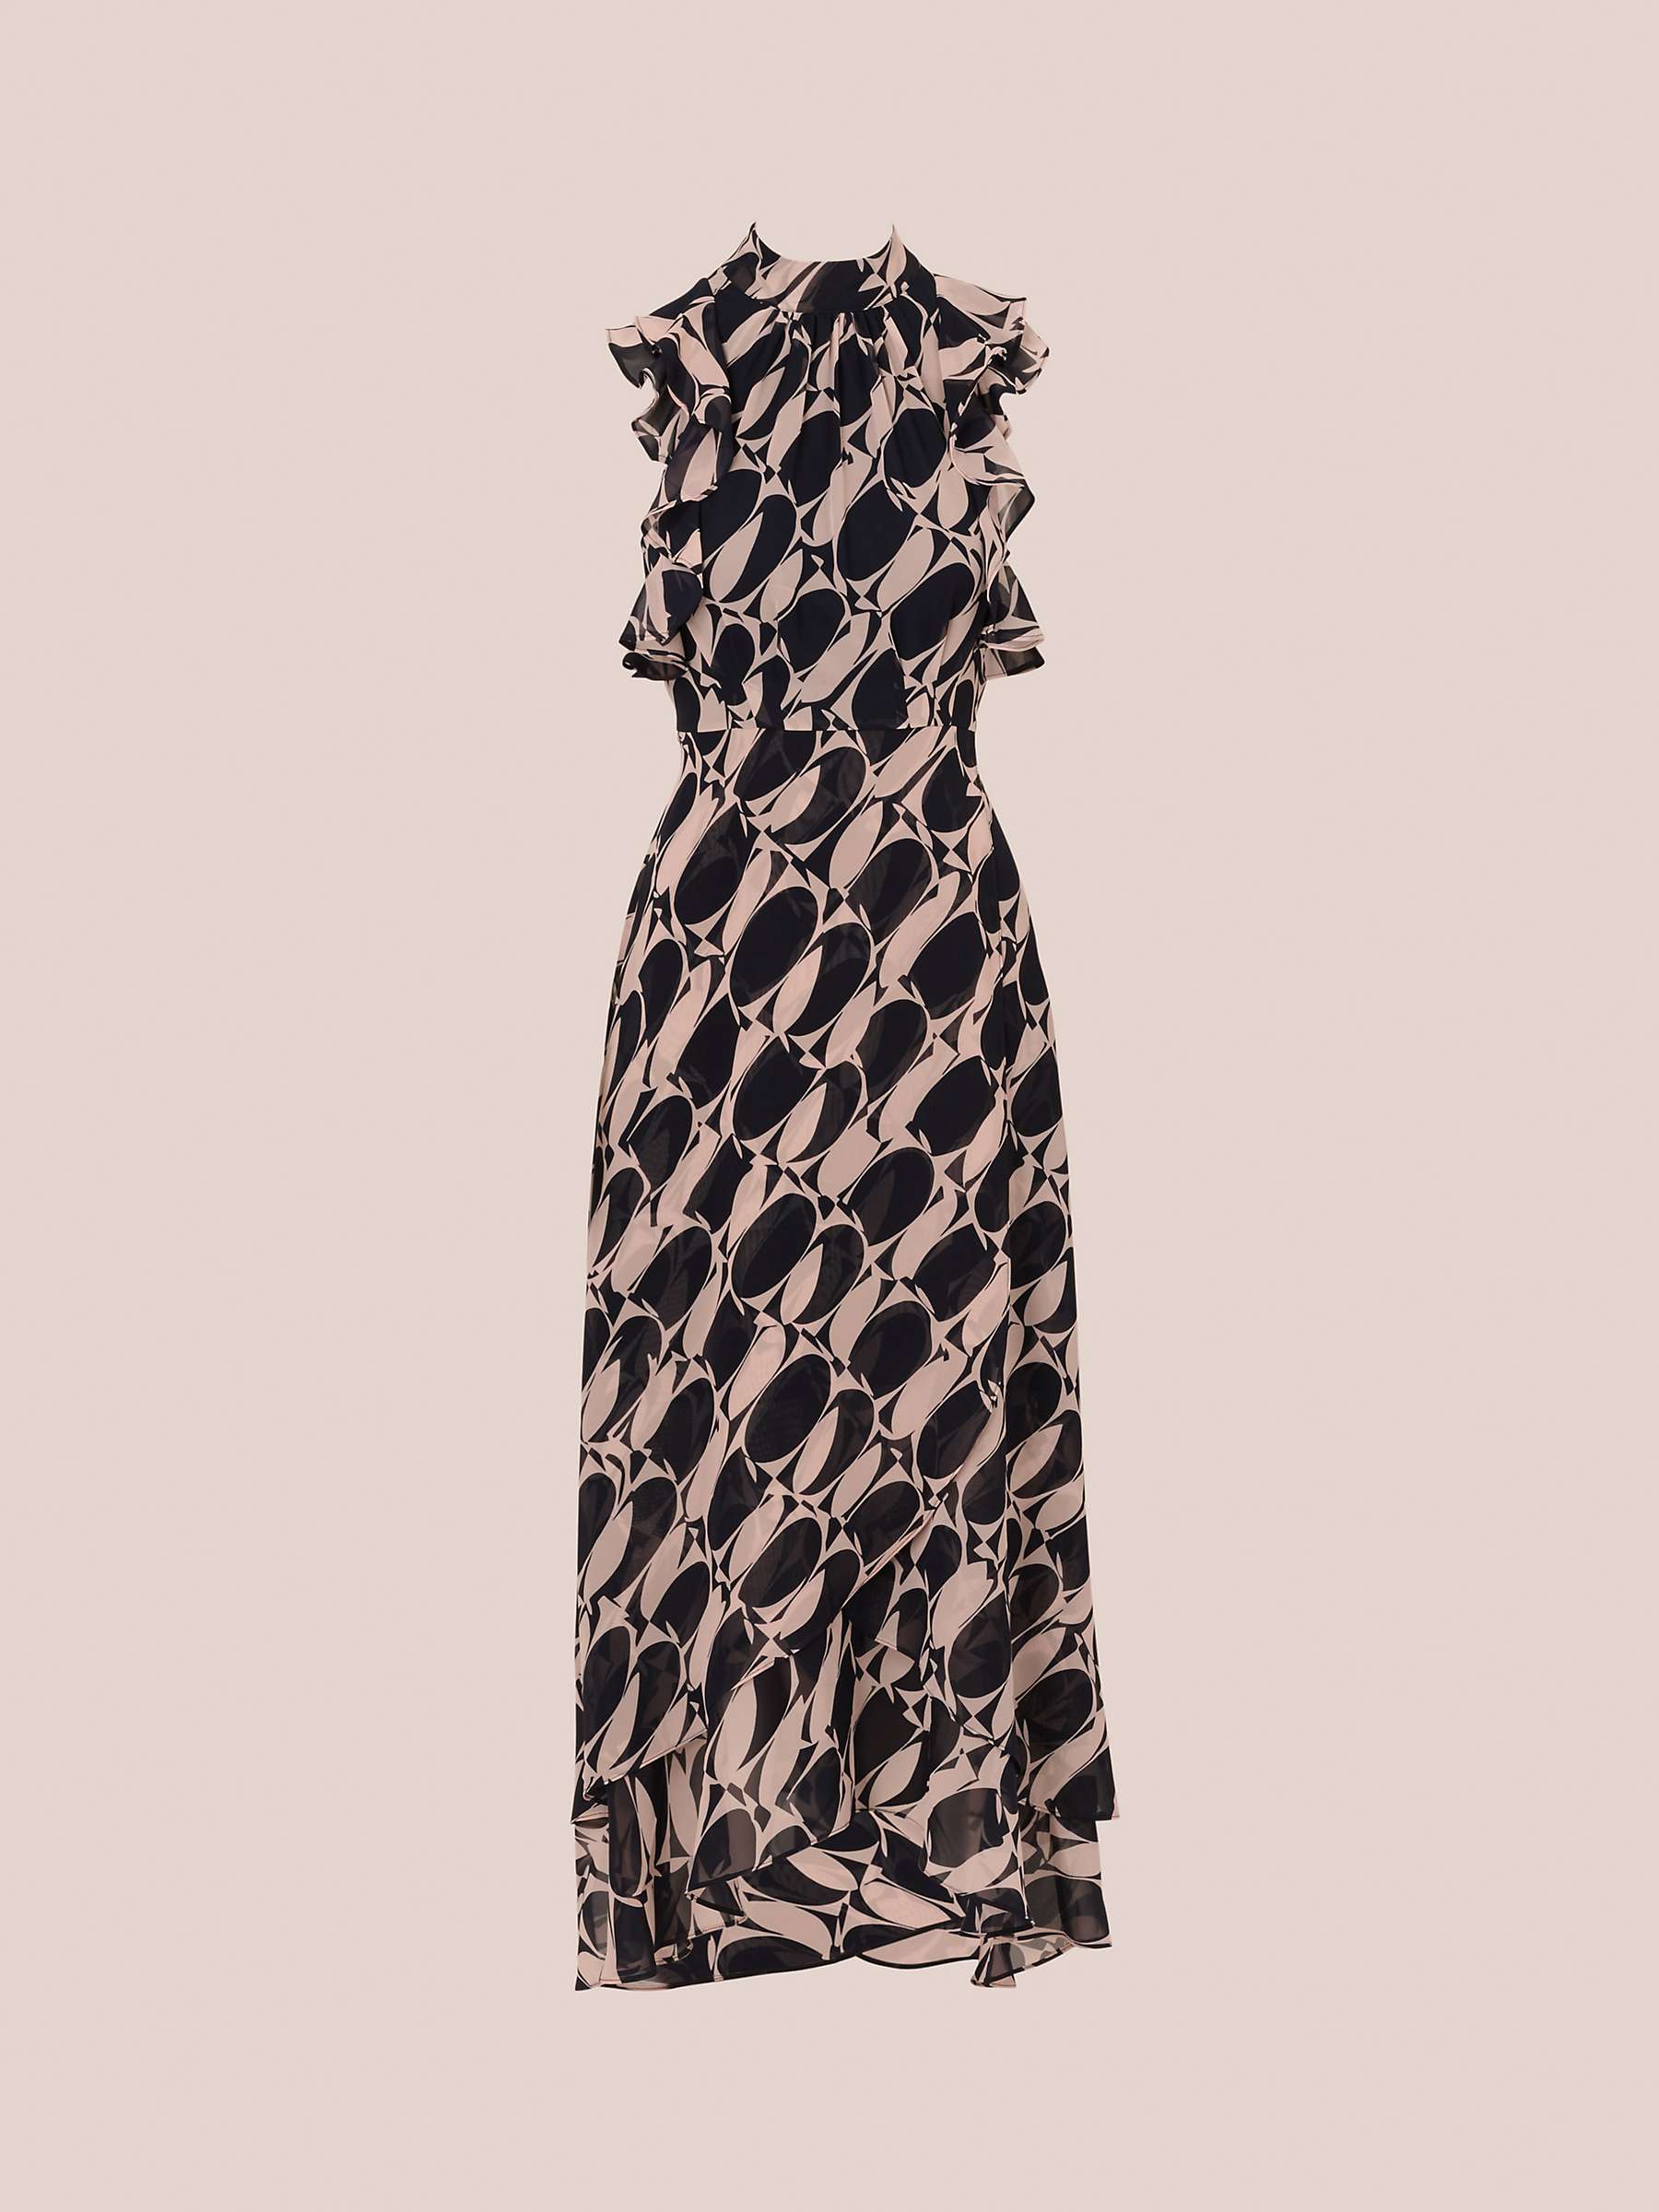 Buy Adrianna Papell Abstract Print Frill Maxi Dress, Navy/Blush Online at johnlewis.com